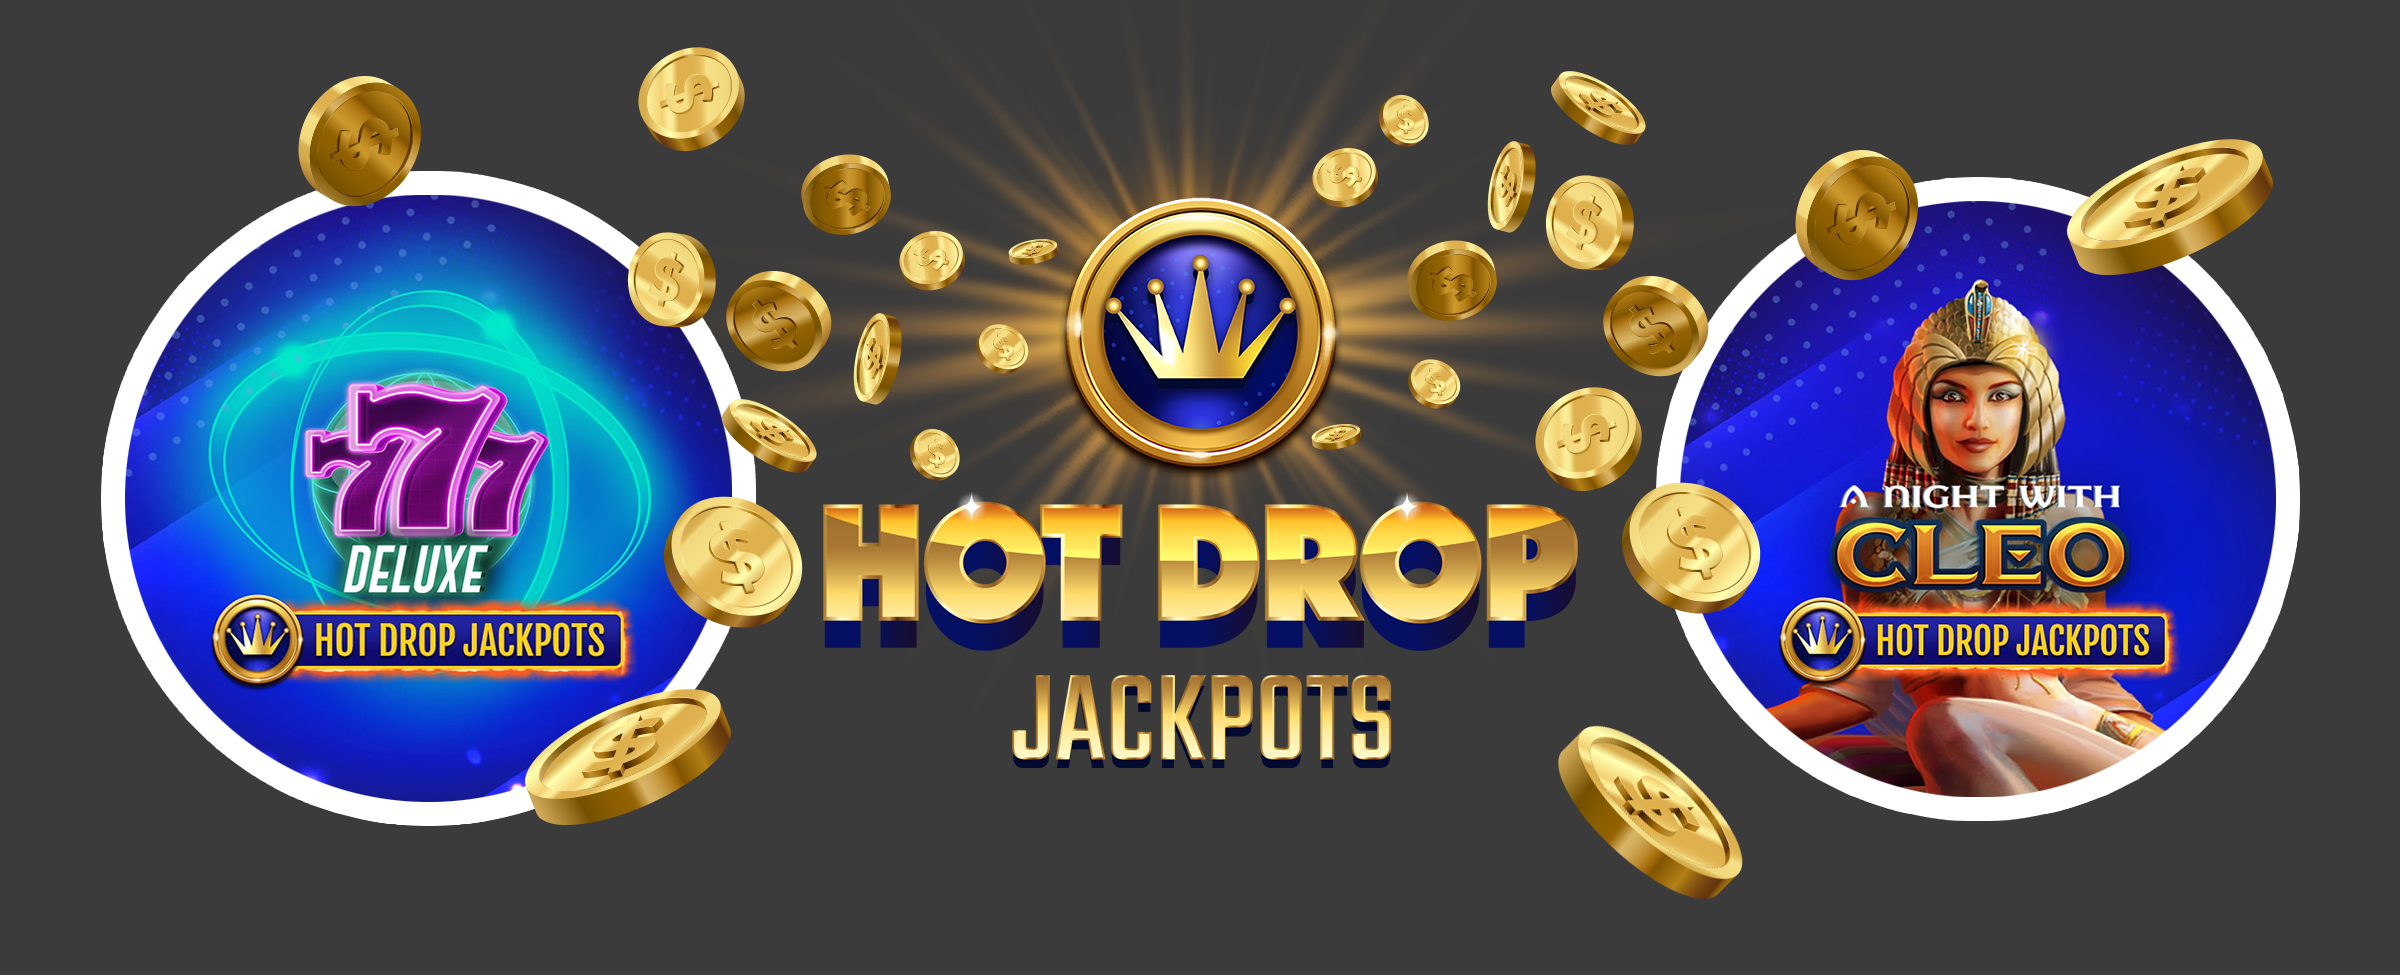 : It’s the world’s worst kept secret that at Joe Fortune, you have access to Hot Drop Jackpots. What are they? Oh, ain’t no thang. Unless your goal is to make coin like a minting press. Let’s break it down. Ka-ching!